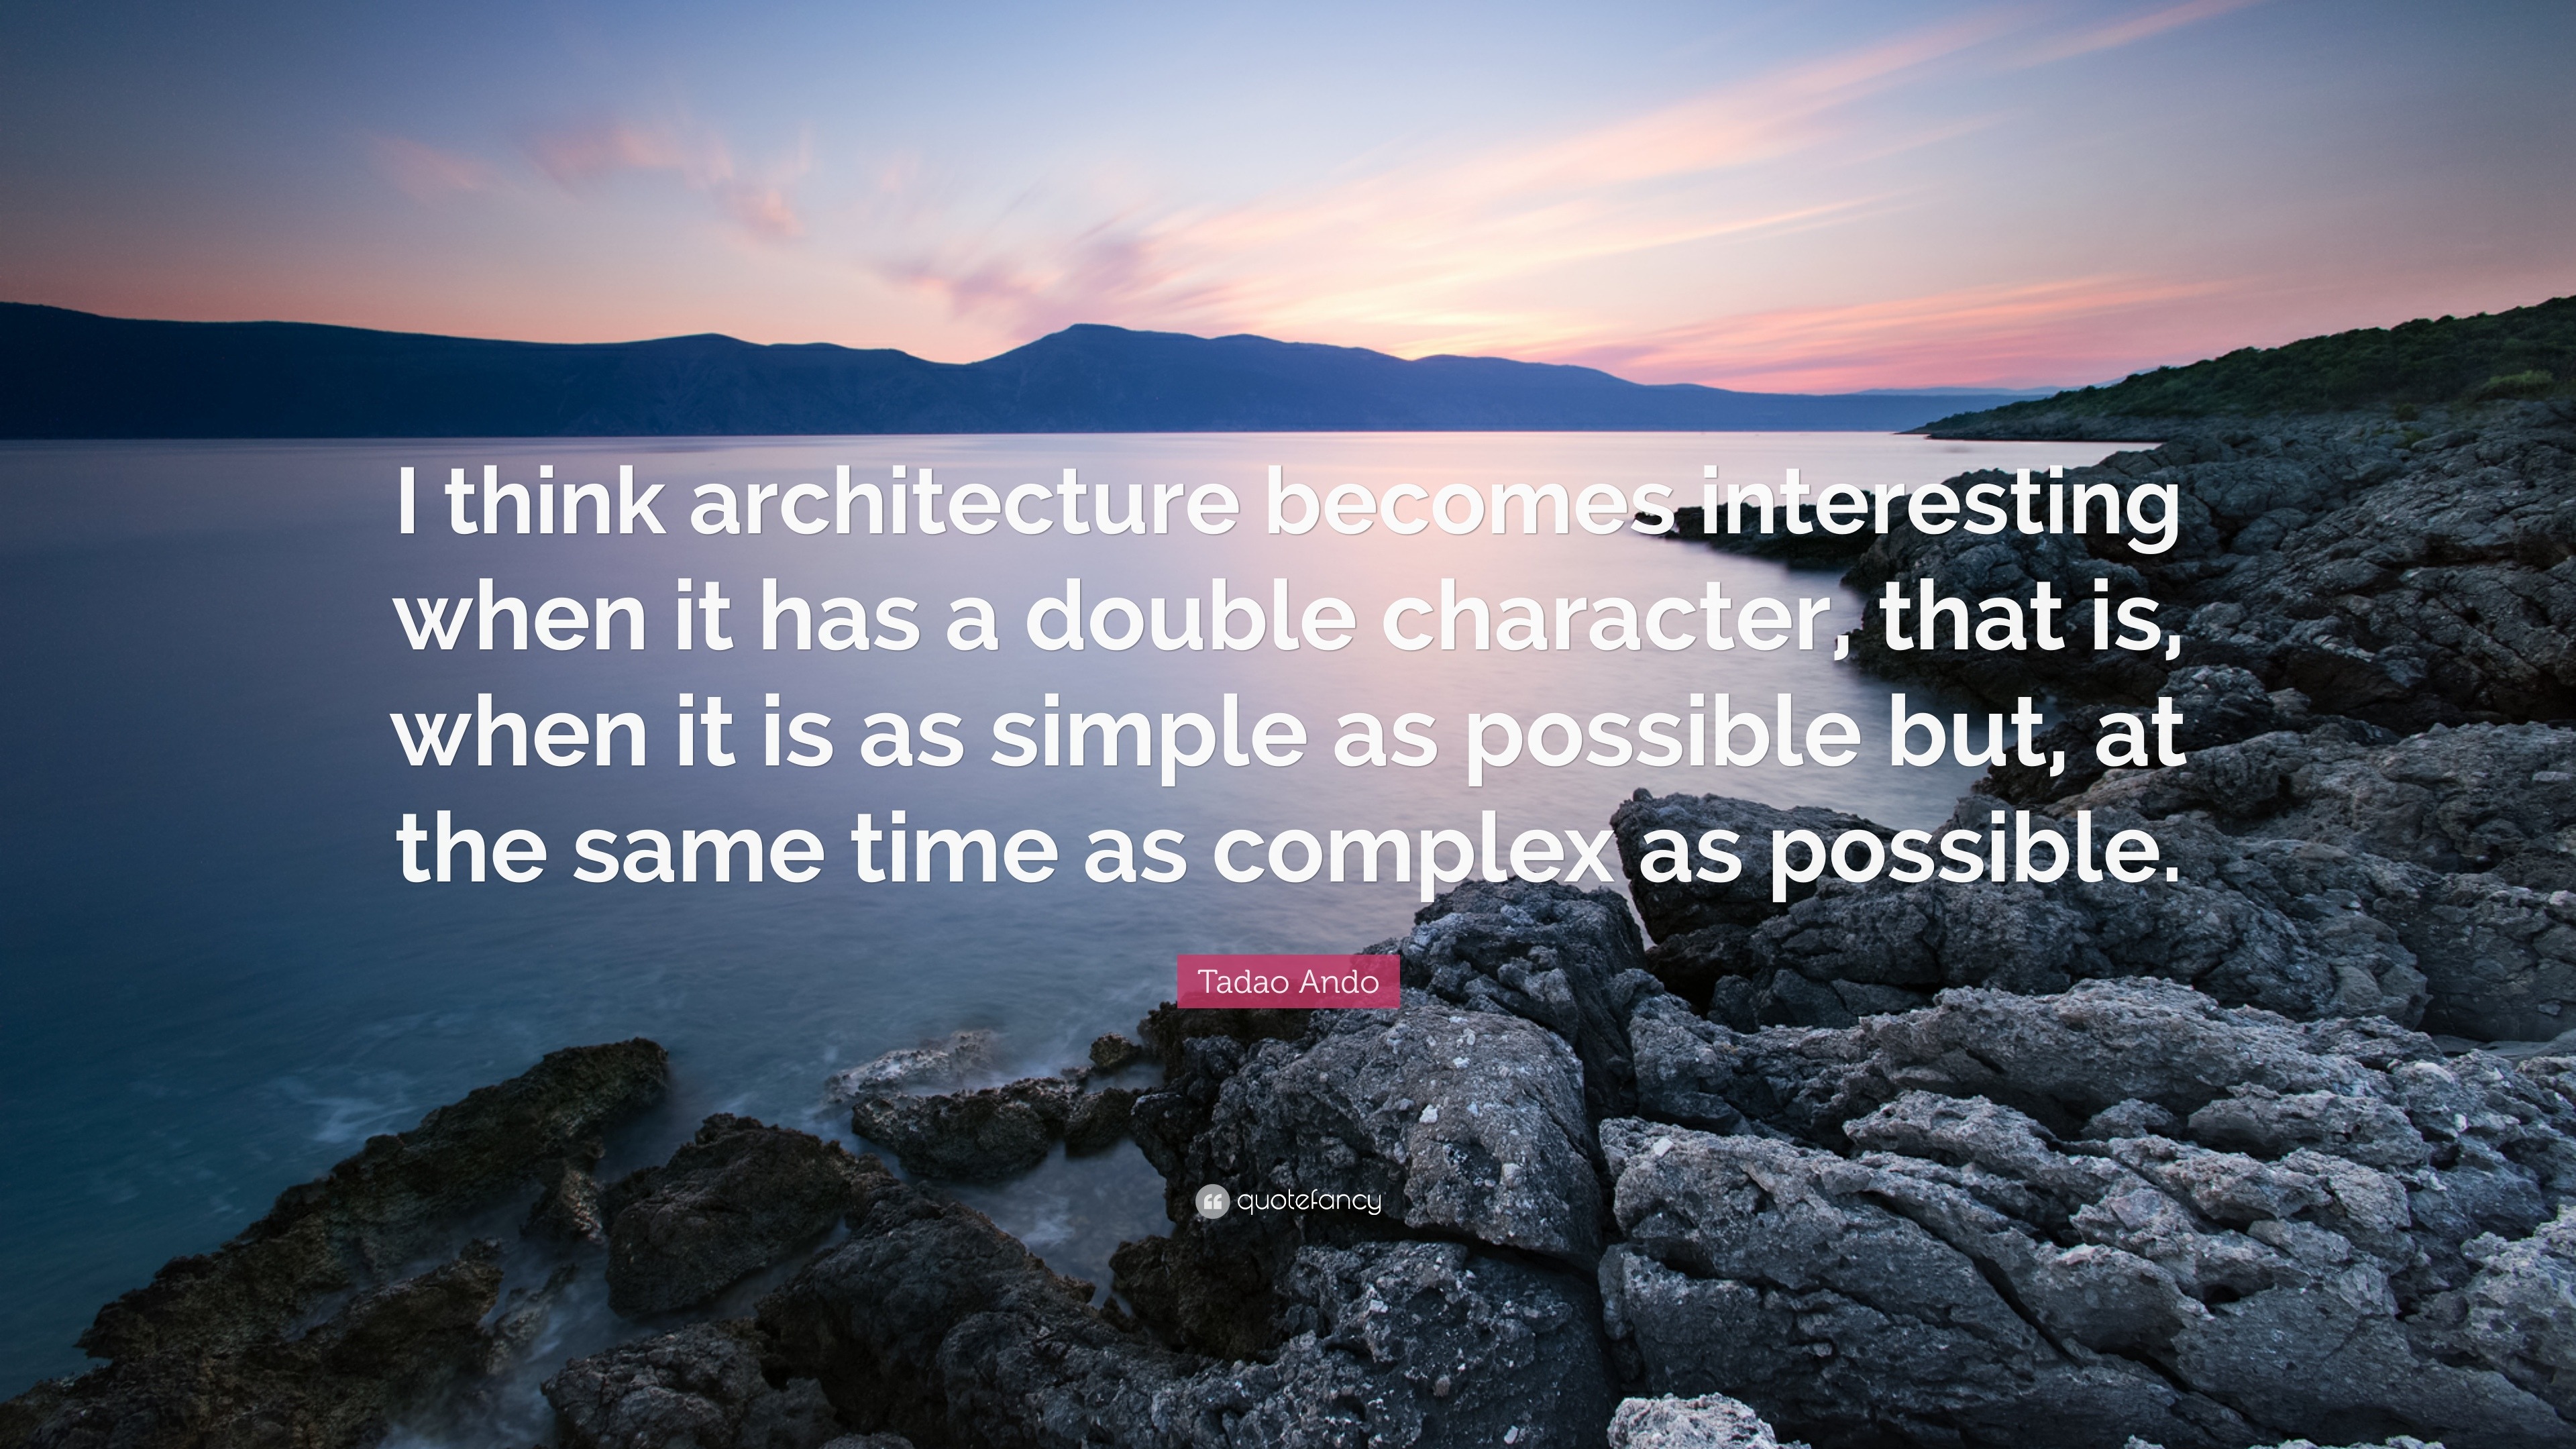 Tadao Ando Quote: “I think architecture becomes interesting when it has ...